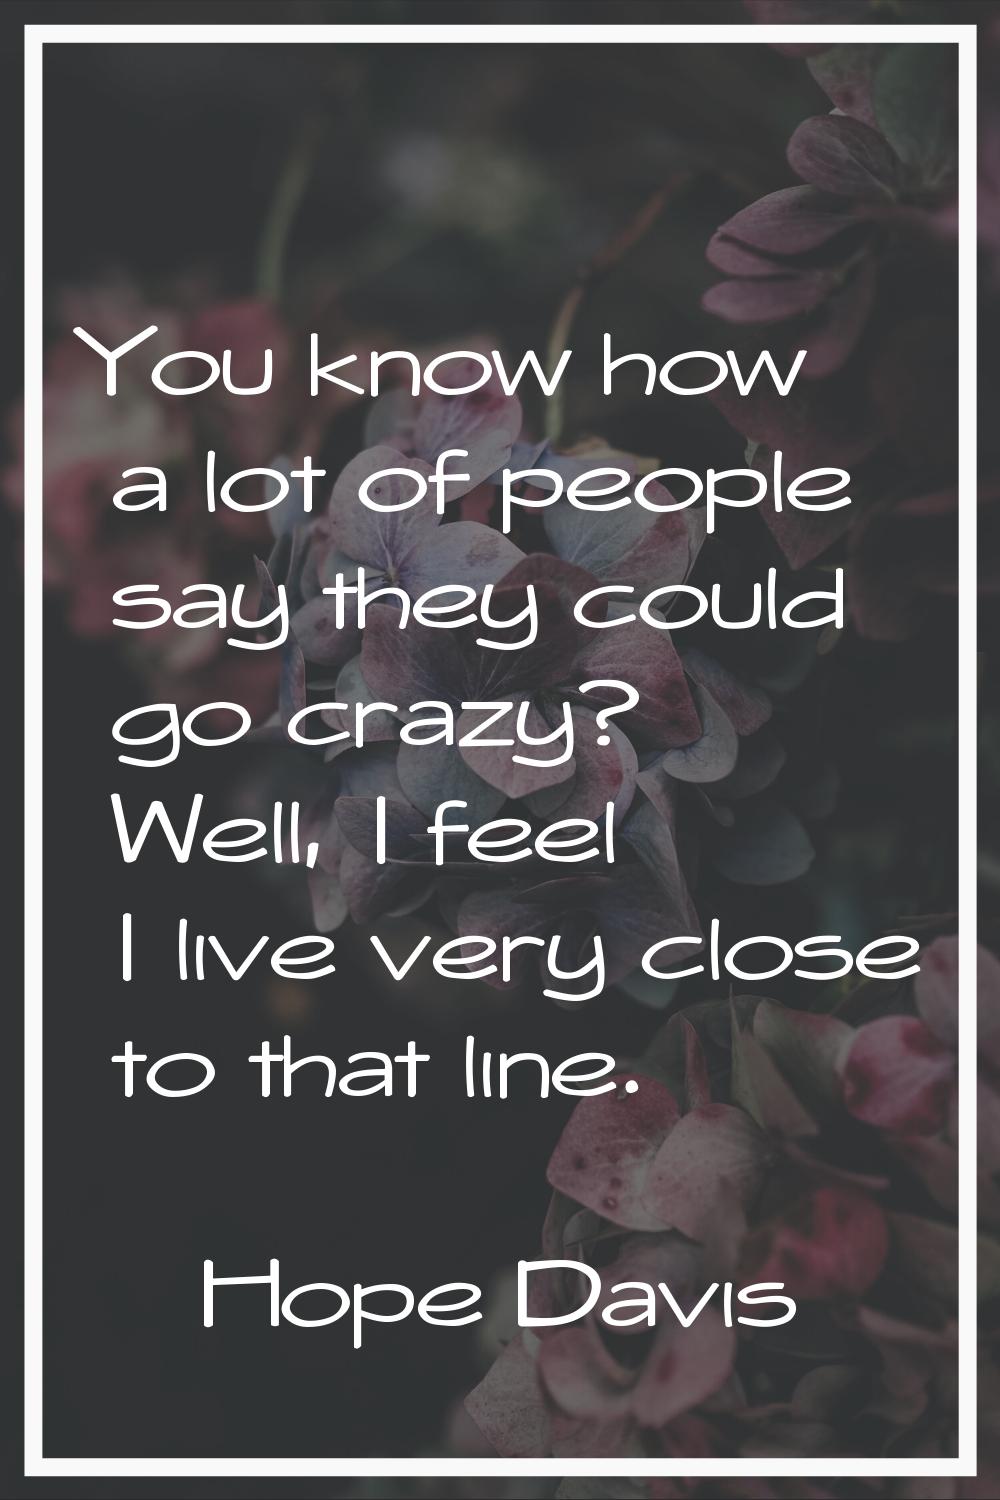 You know how a lot of people say they could go crazy? Well, I feel I live very close to that line.